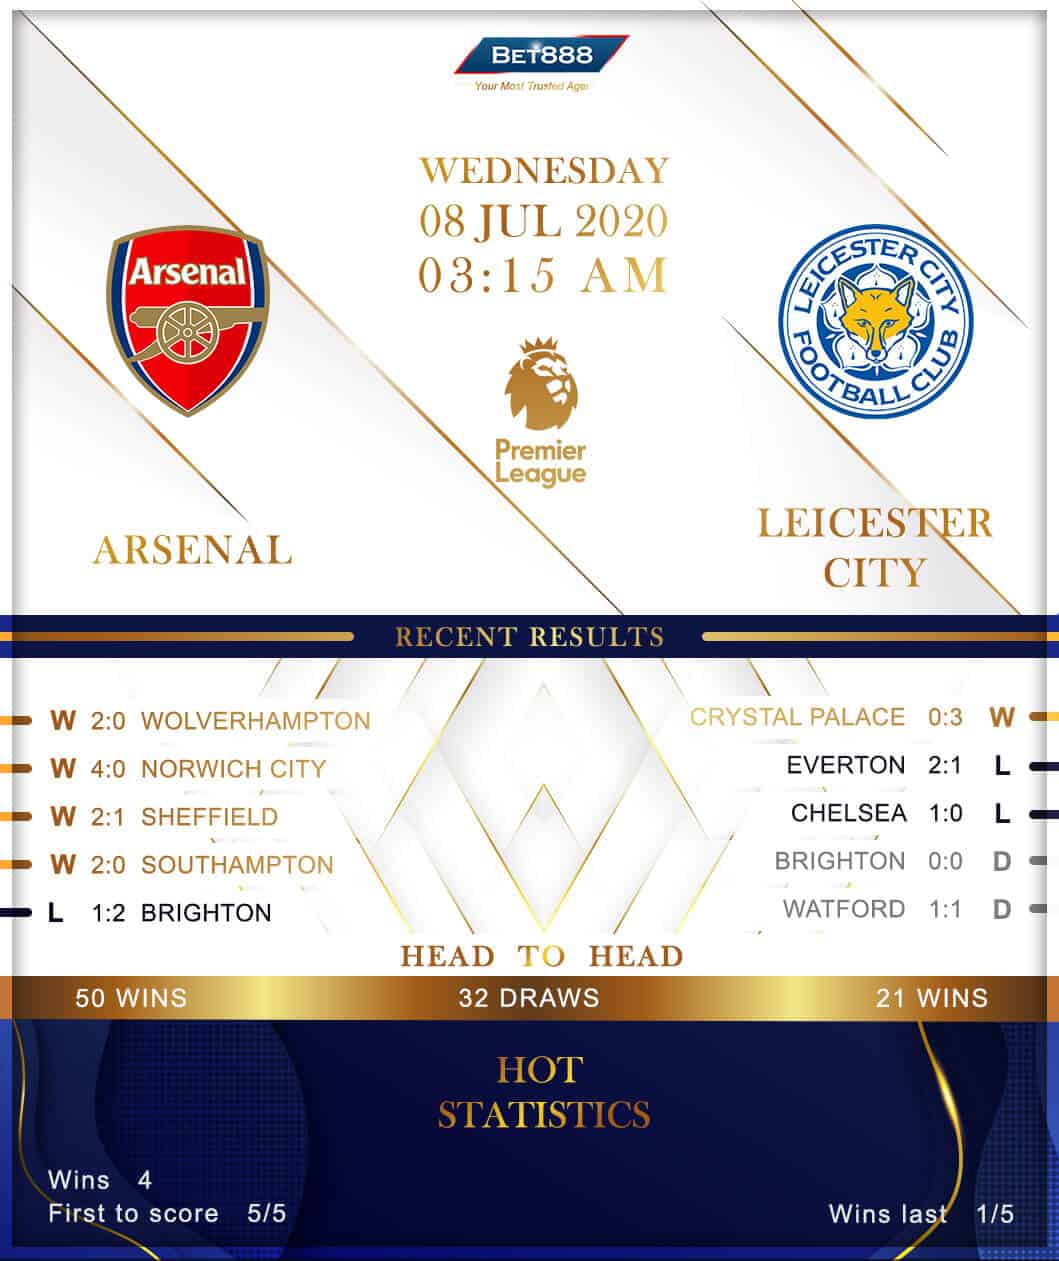 Arsenal vs  Leicester City 08/07/20